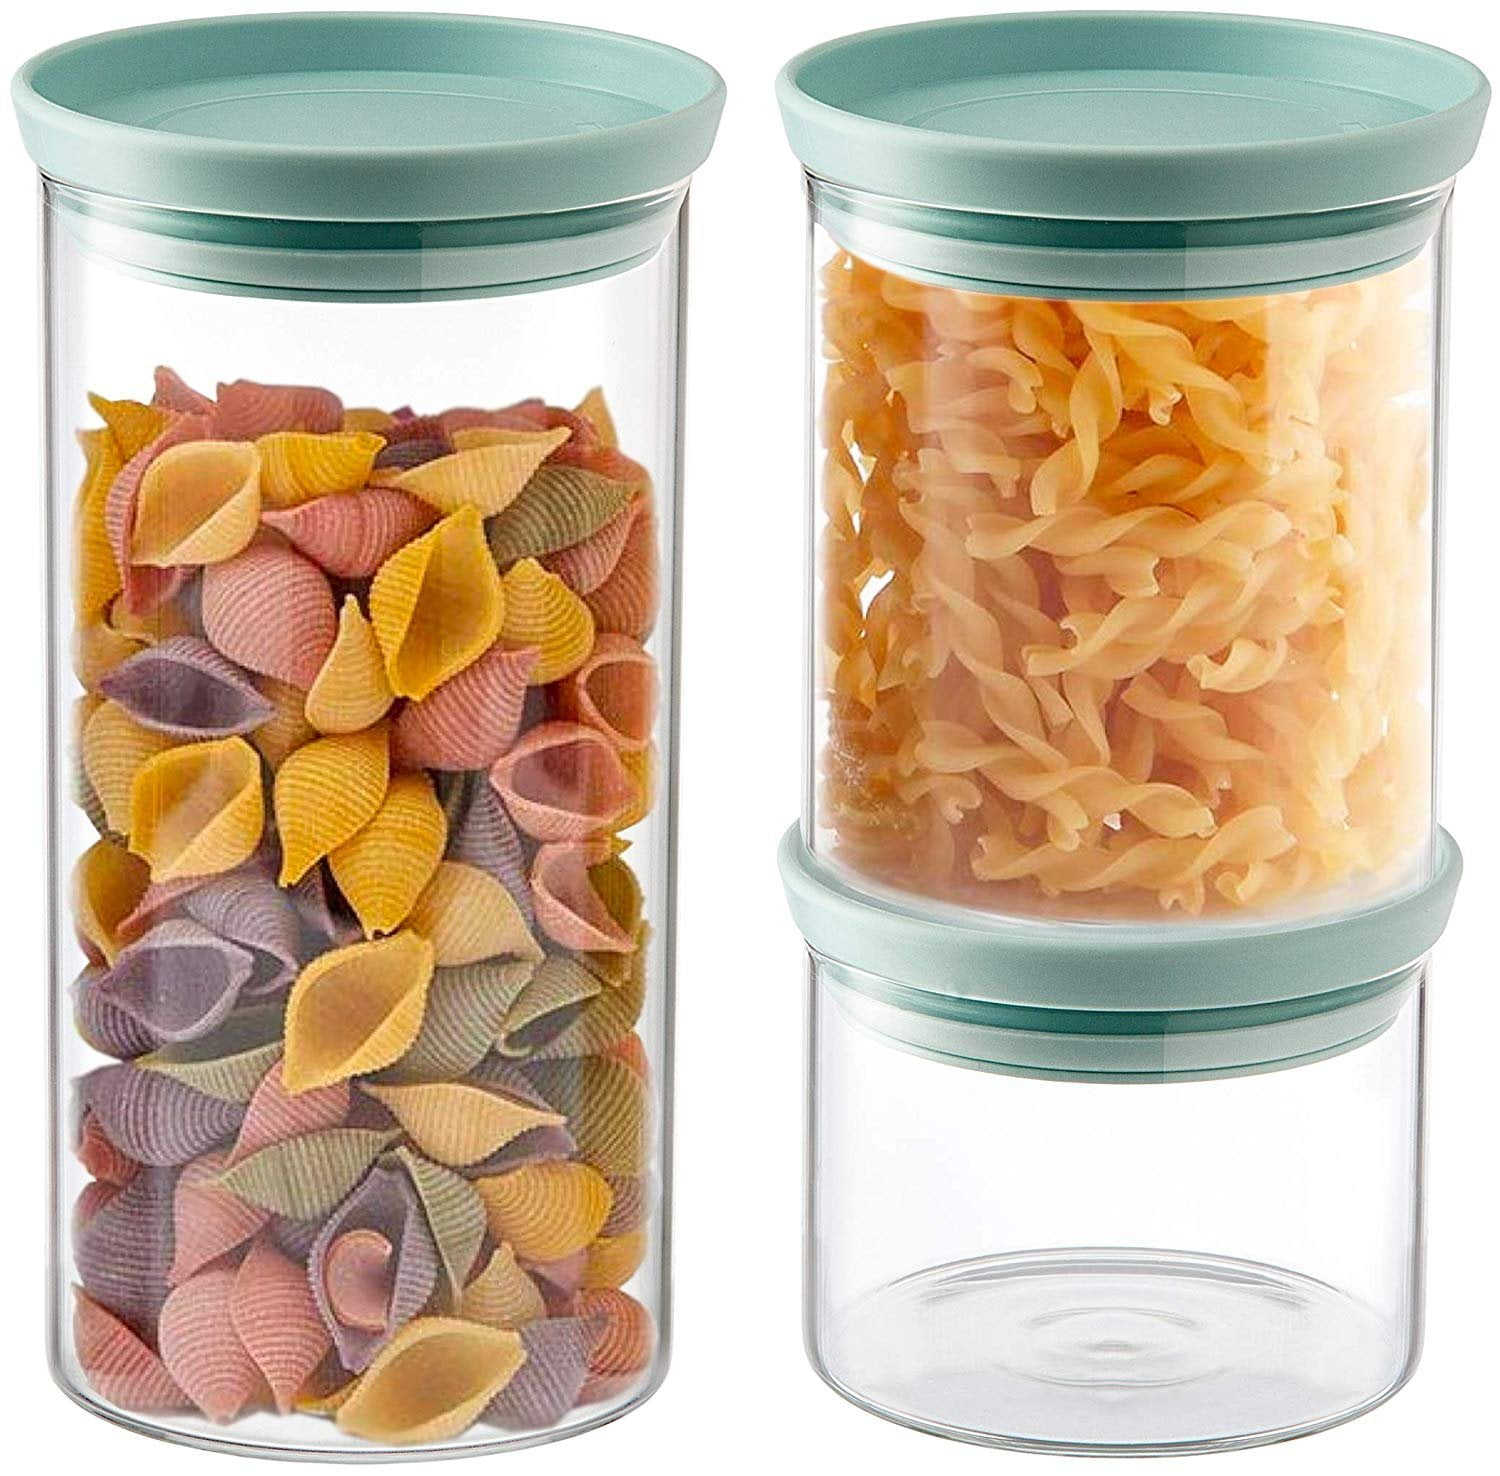 Godinger Food Storage Containers, Stackable Organization Canister Glass Jars - Mixed, Set of 3